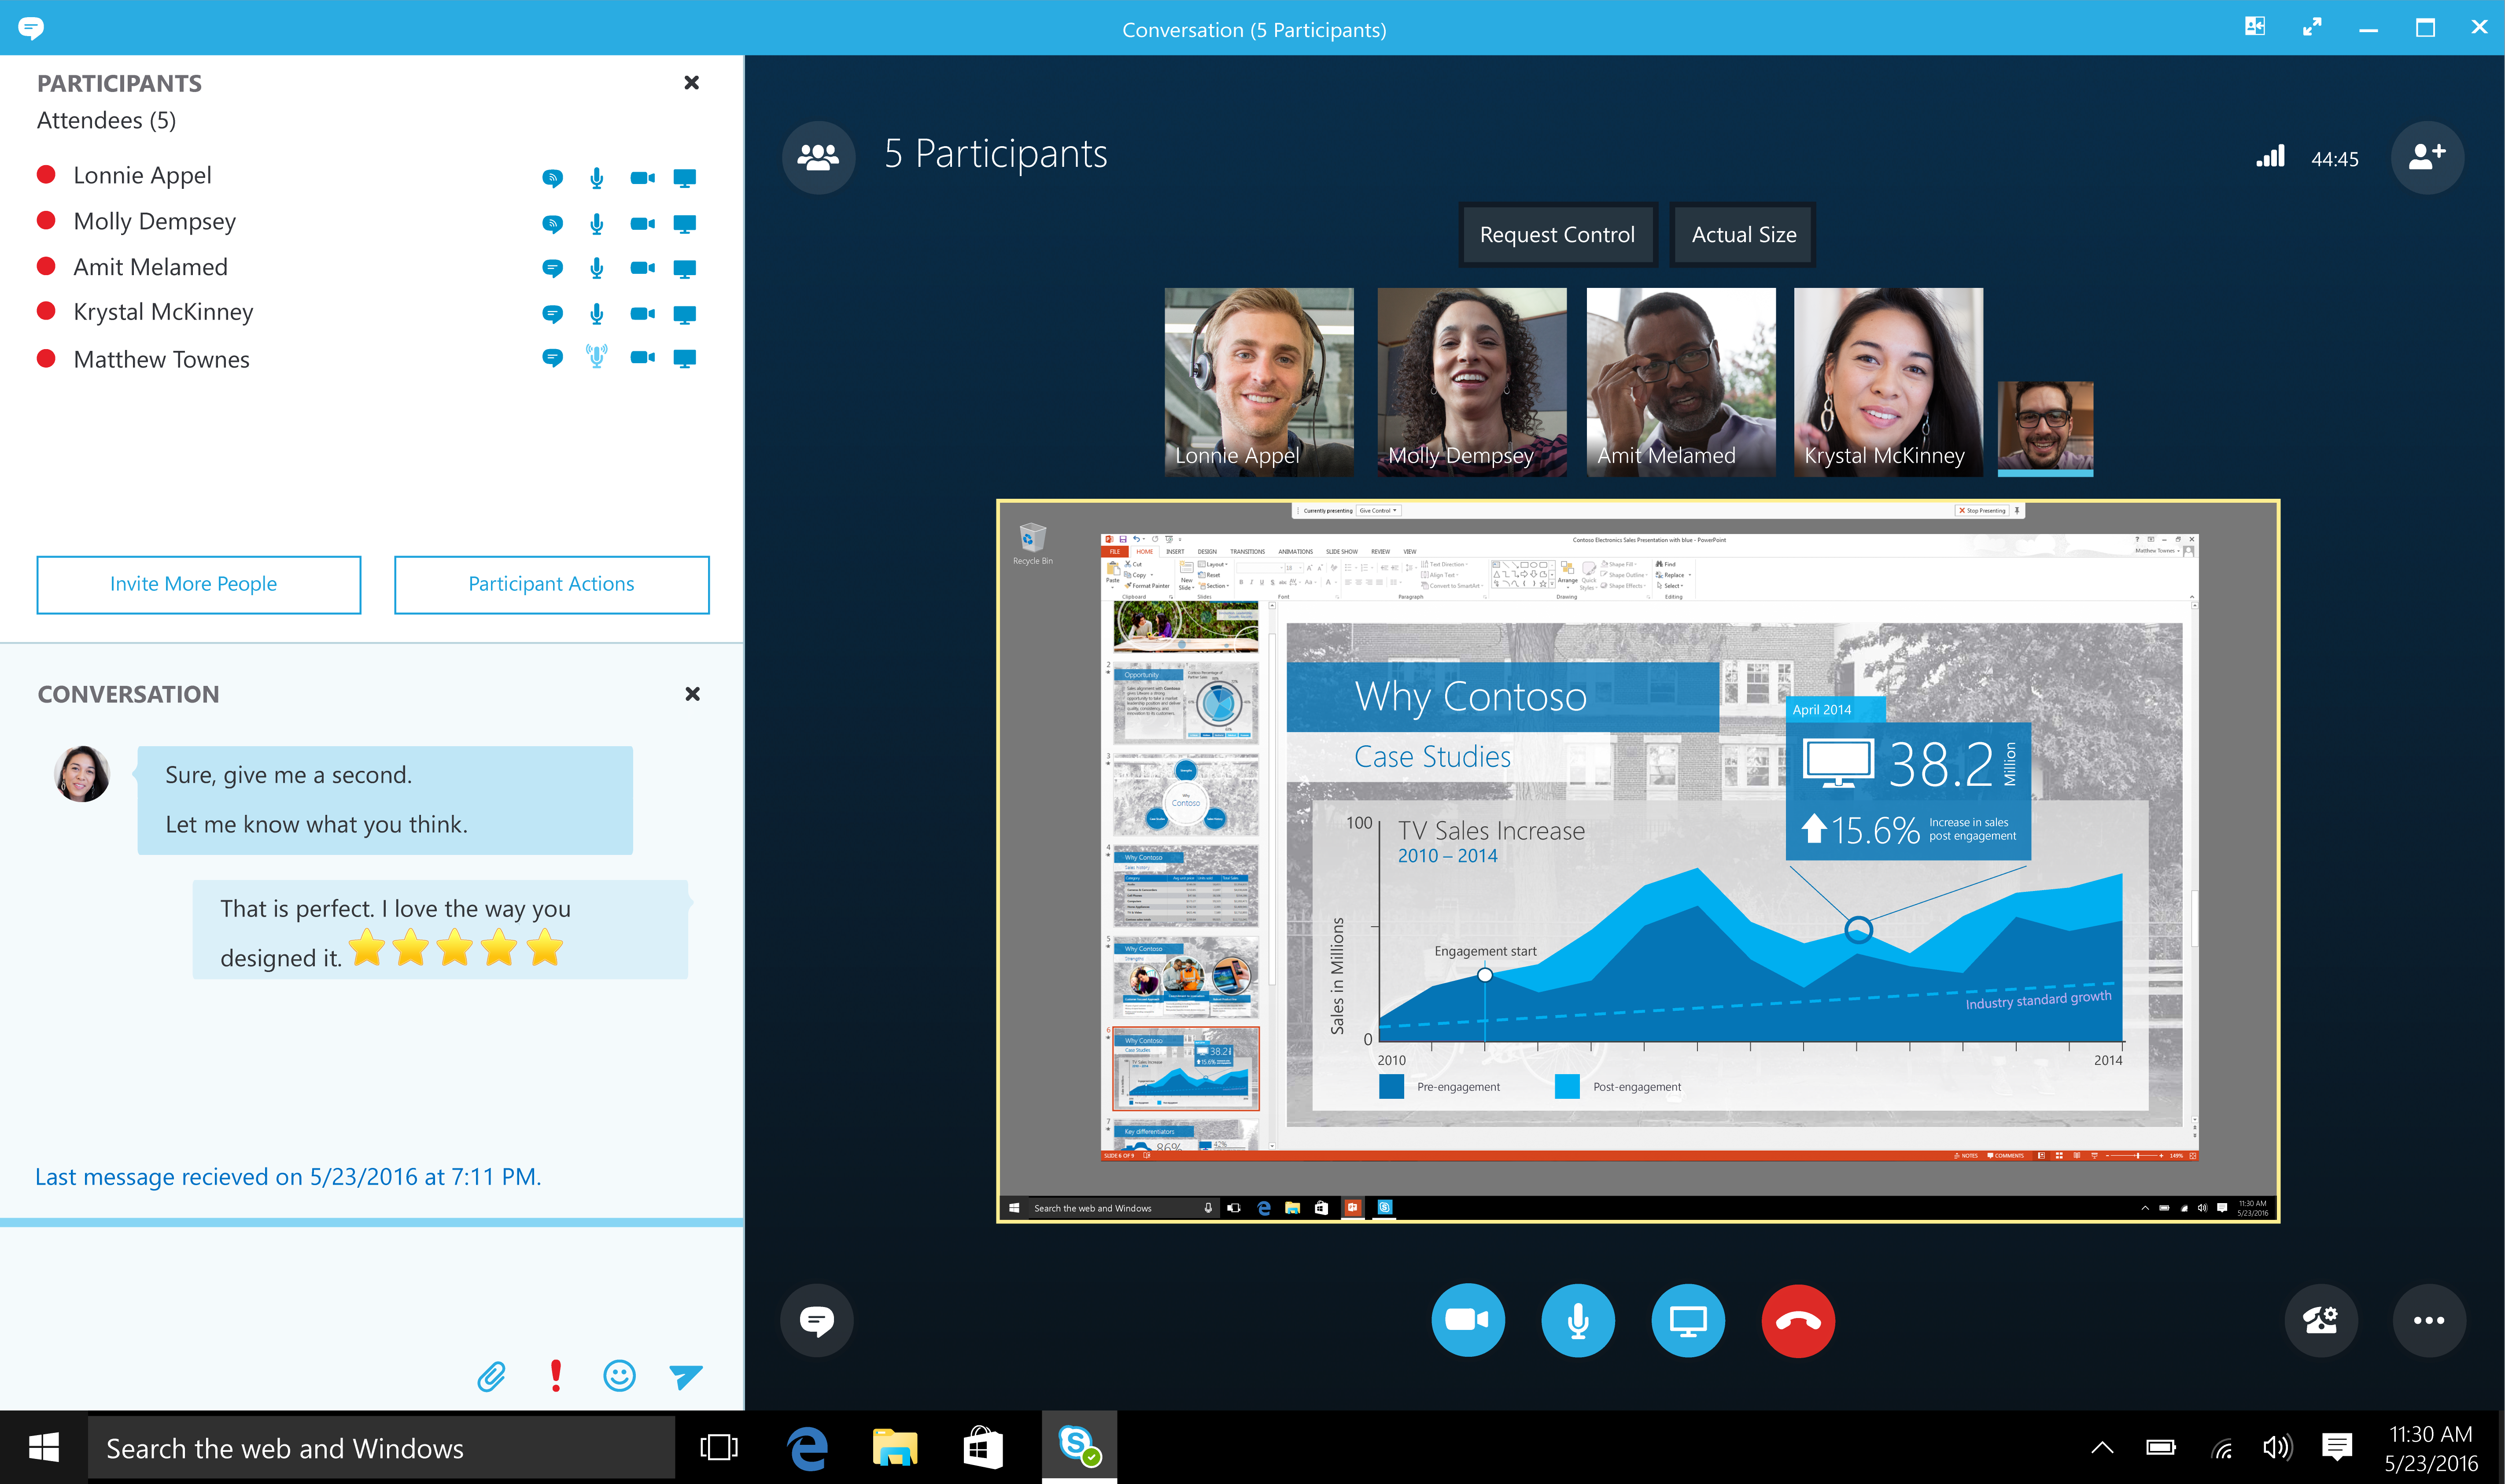 A screen view of a Skype video call with 5 participants and a screen sharing feature